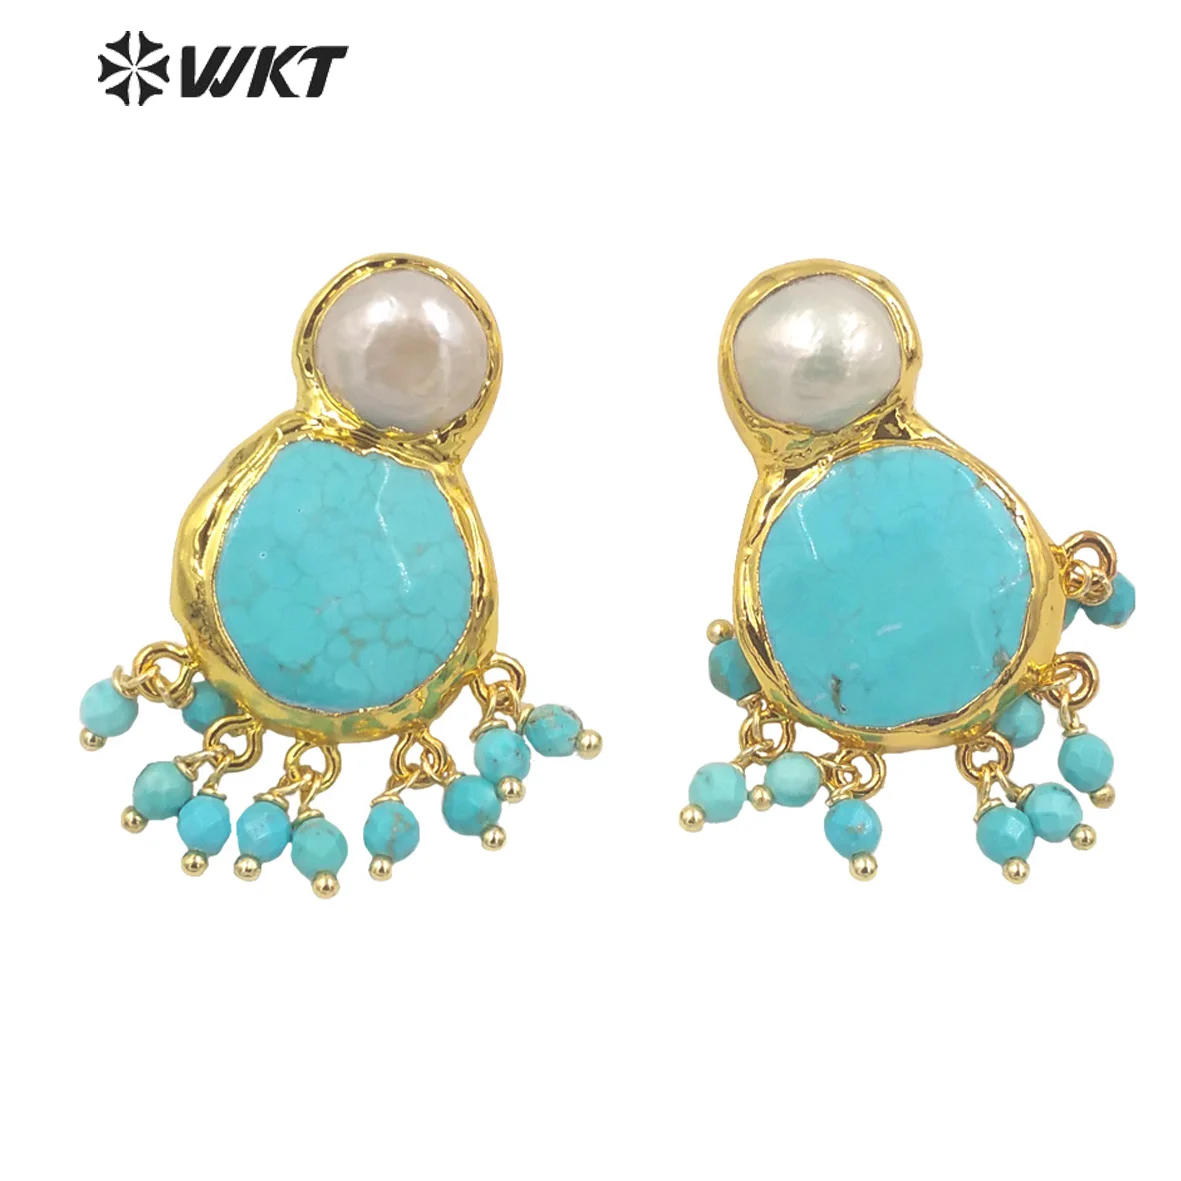 

WT-MPE117 WKT New Arrival Special Design 18k Gold Plated Turquoise And Pearl Women Earrings For Party Accessories